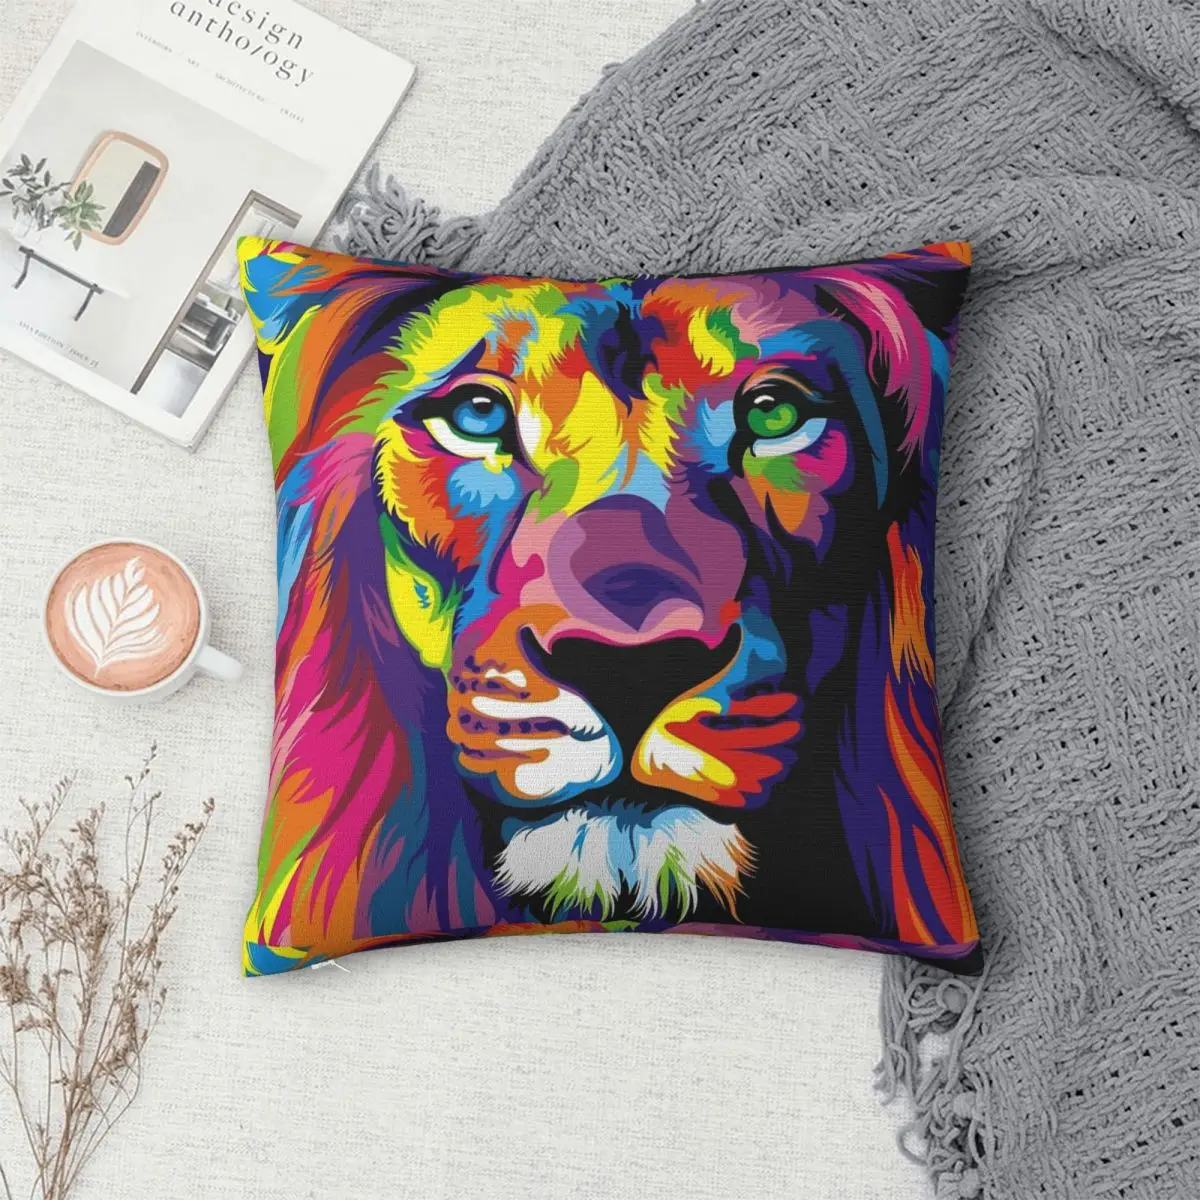 

Banksy Rainbow Lion Pillowcase Polyester Pillows Cover Cushion Comfort Throw Pillow Sofa Decorative Cushions Used for Bedroom